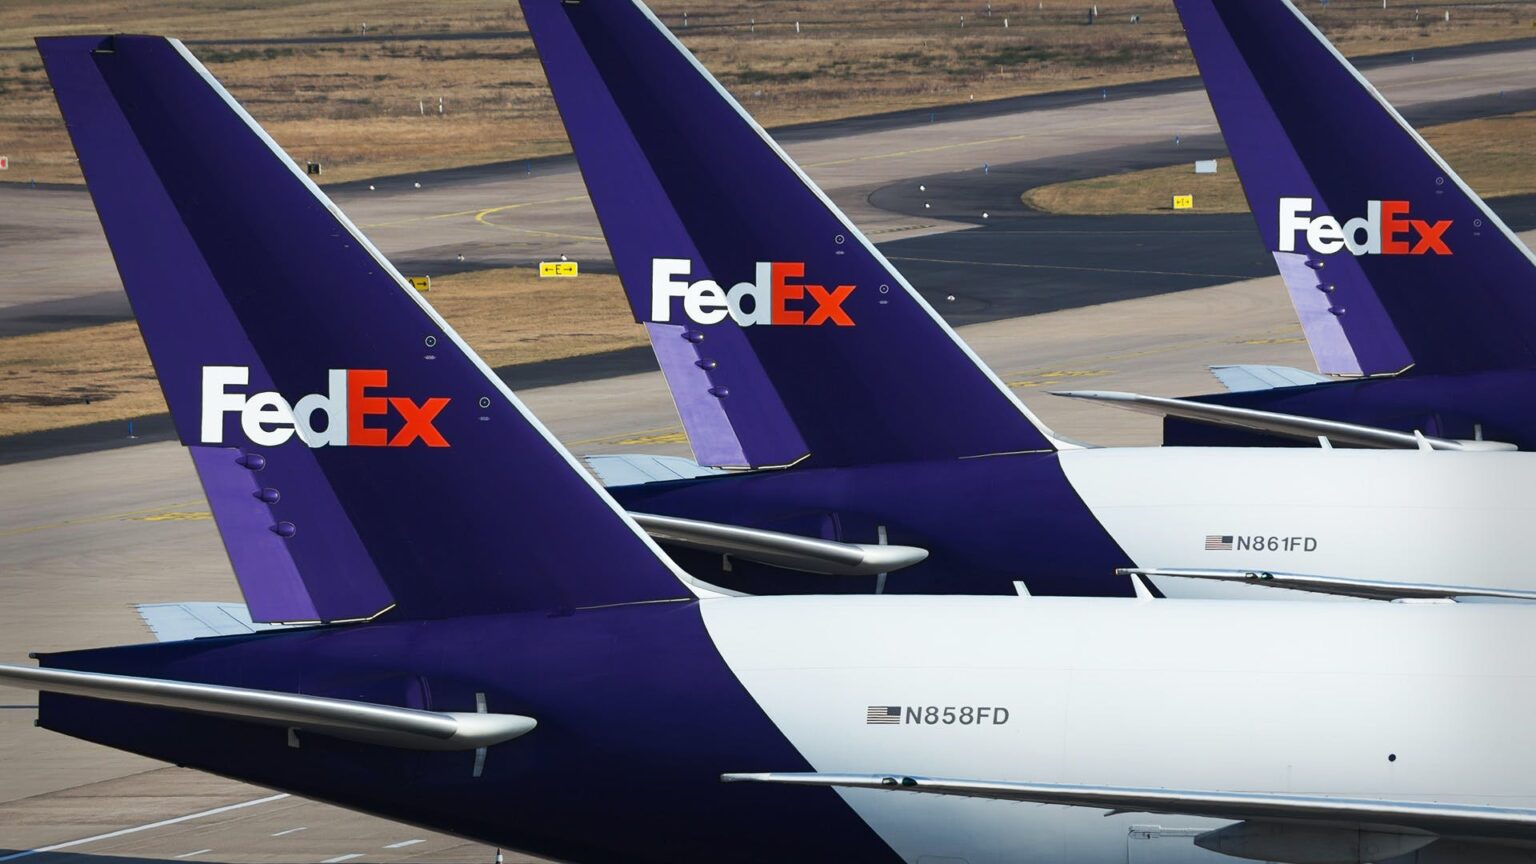 case-study-how-fedex-pioneered-internet-business-in-the-global